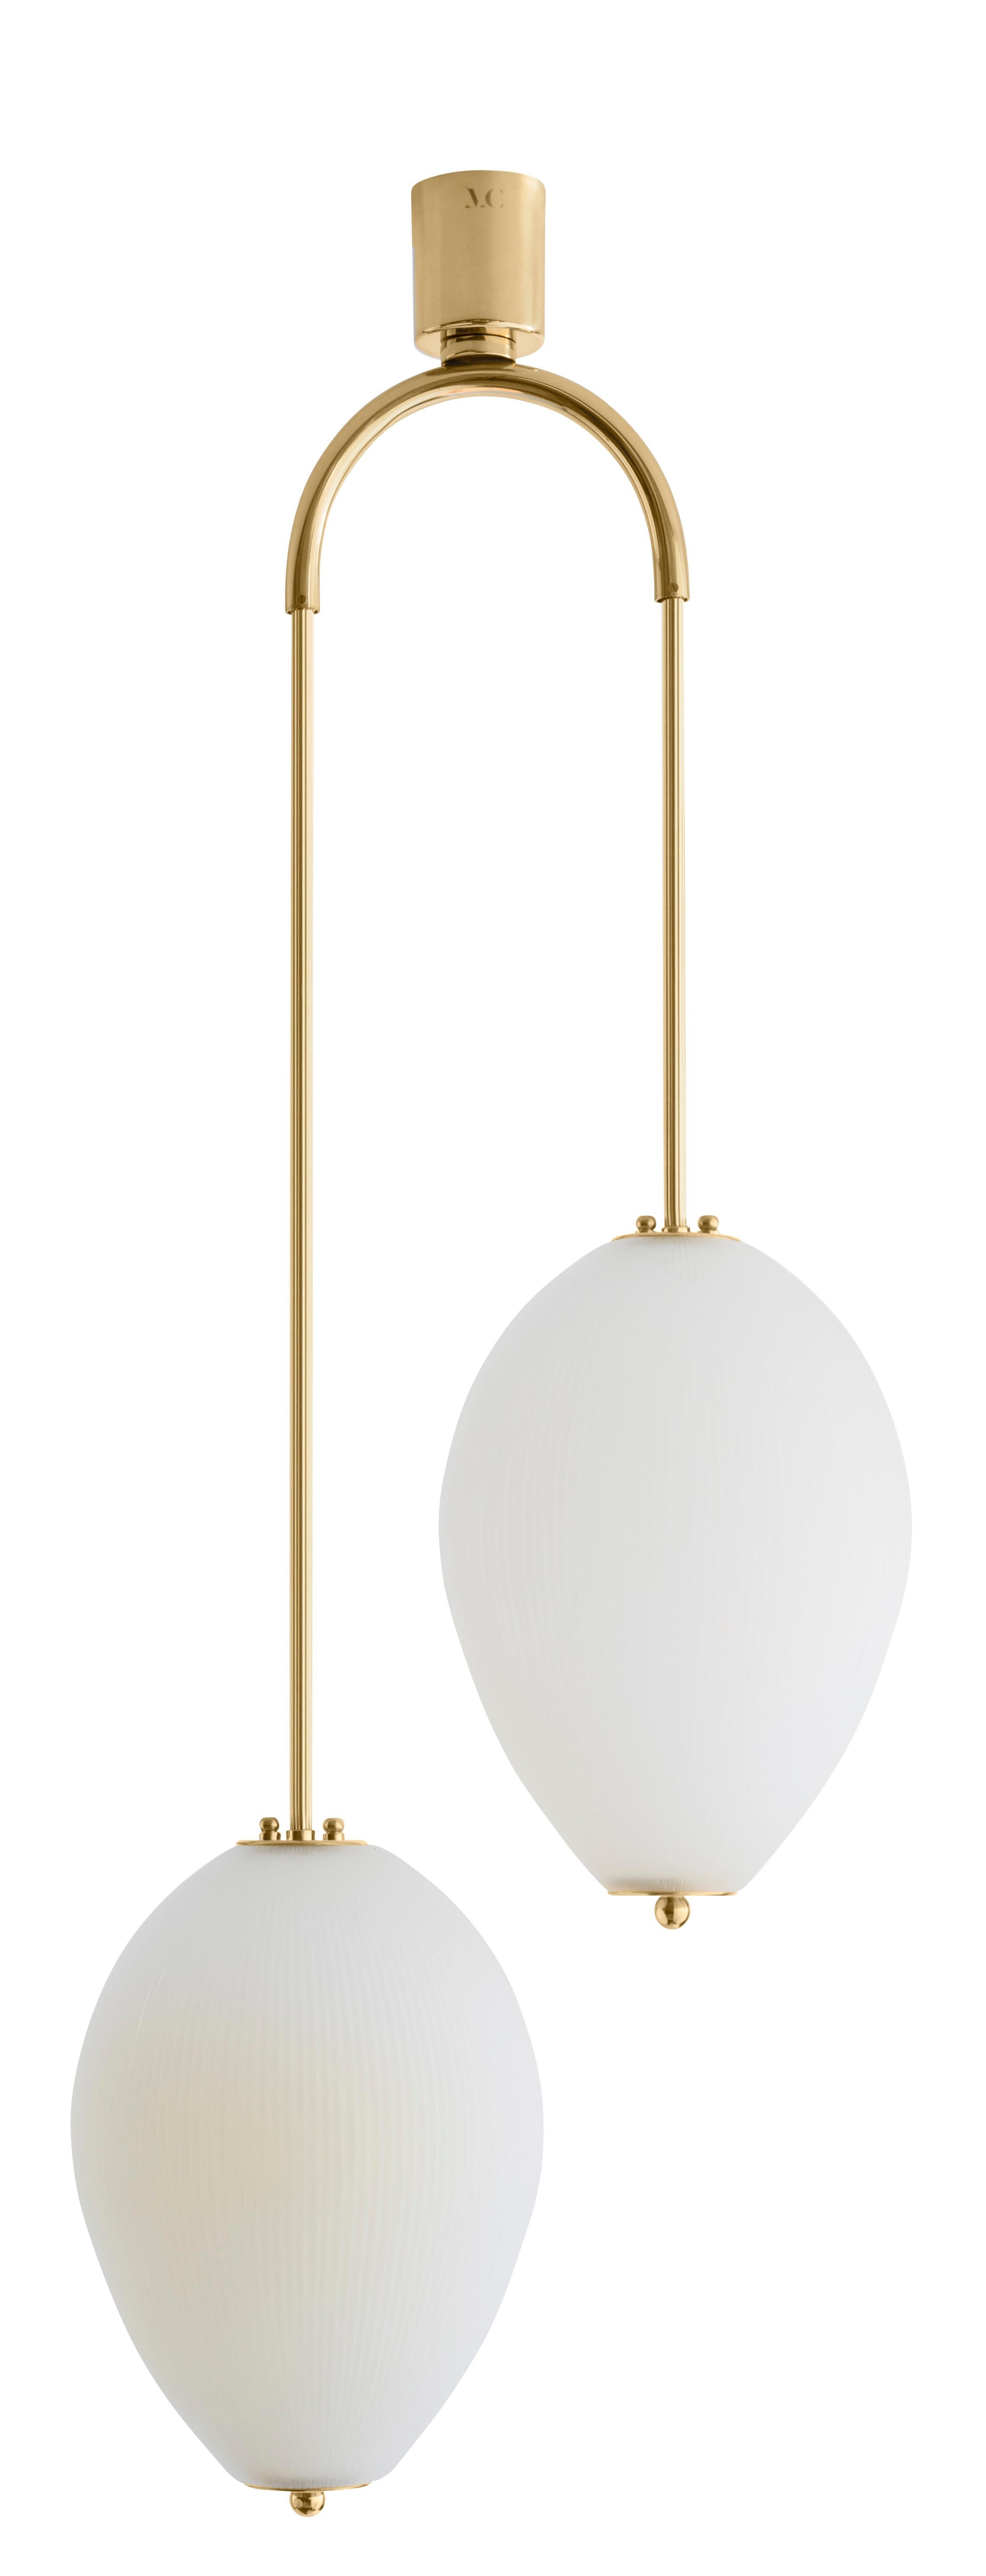 Double chandelier China 10 by Magic Circus Editions.
Dimensions: H 121.5 x W 44.3 x D 25.2 cm.
Materials: brass, mouth blown glass sculpted with a diamond saw.
Colour: ivory.

Available finishes: brass, nickel.
Available colours: enamel soft